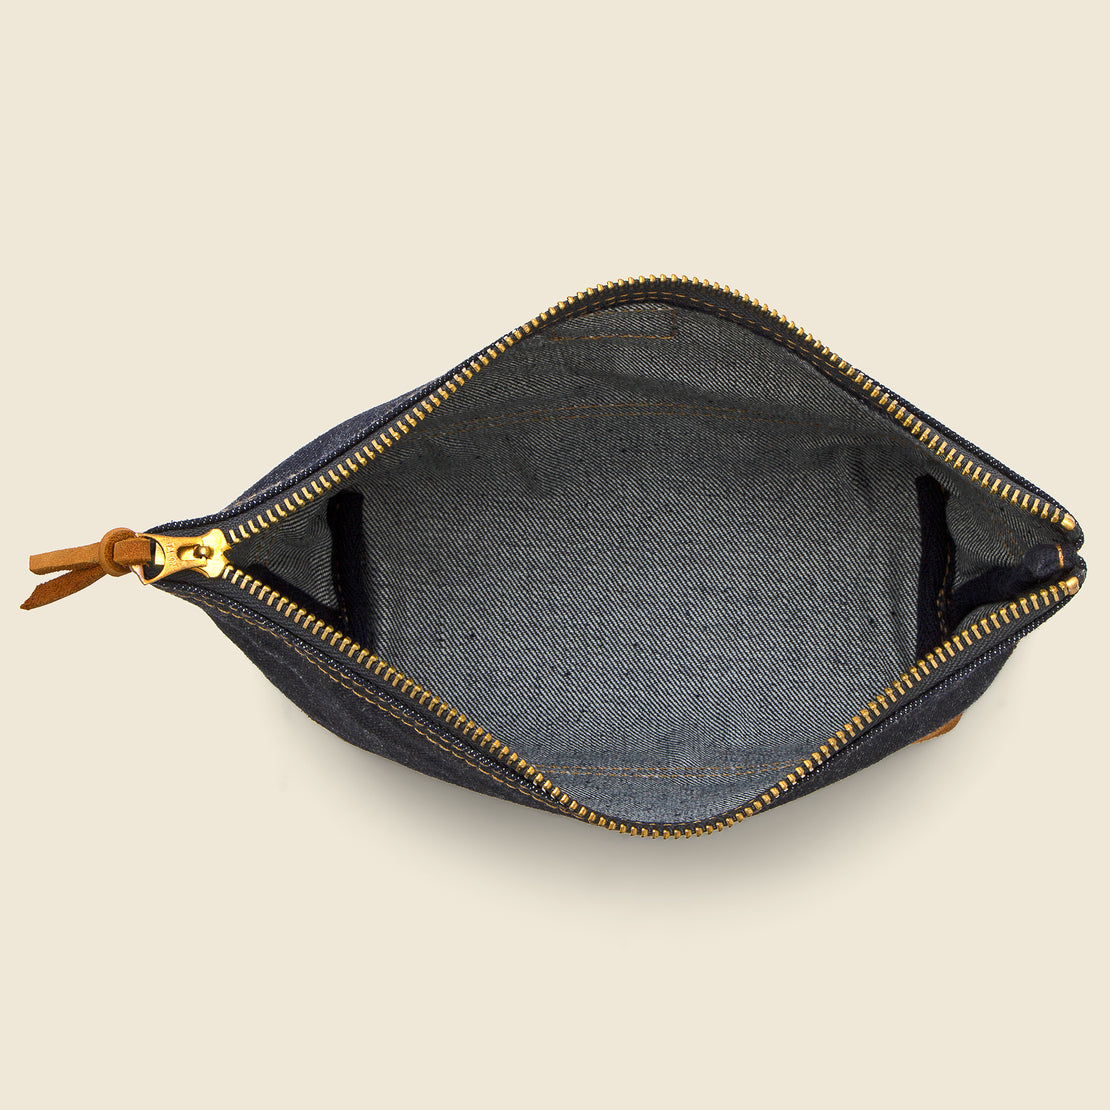 Large Gusset Pouch - Indigo/Brown Suede - RRL - STAG Provisions - Accessories - Bags / Luggage